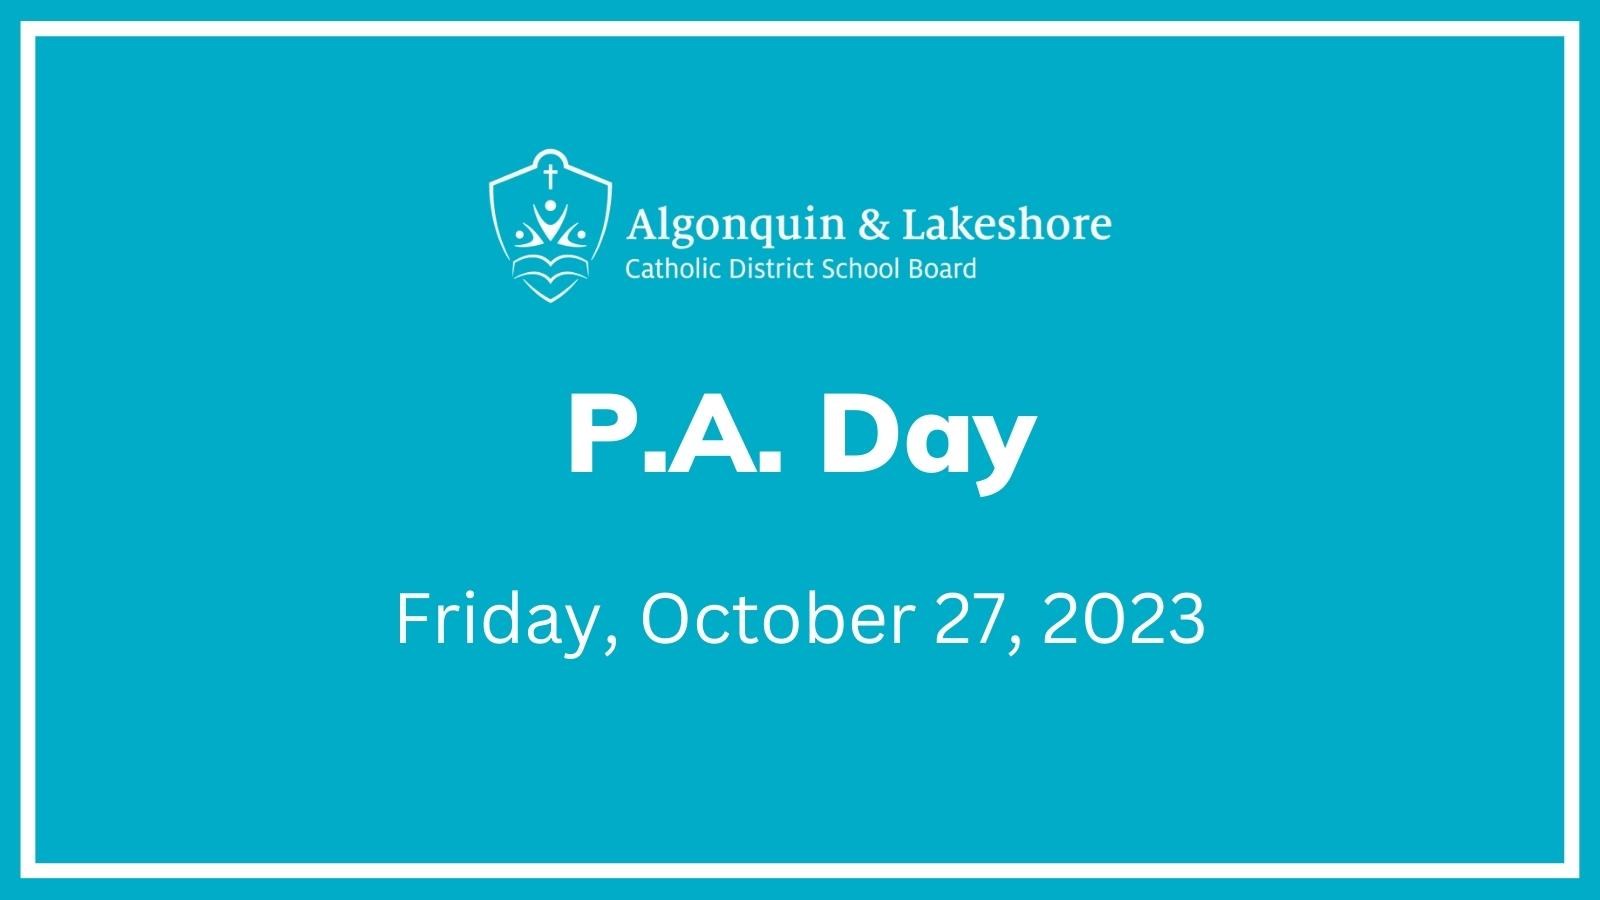 Graphic that says "P.A. Day Friday, October 27, 2023"